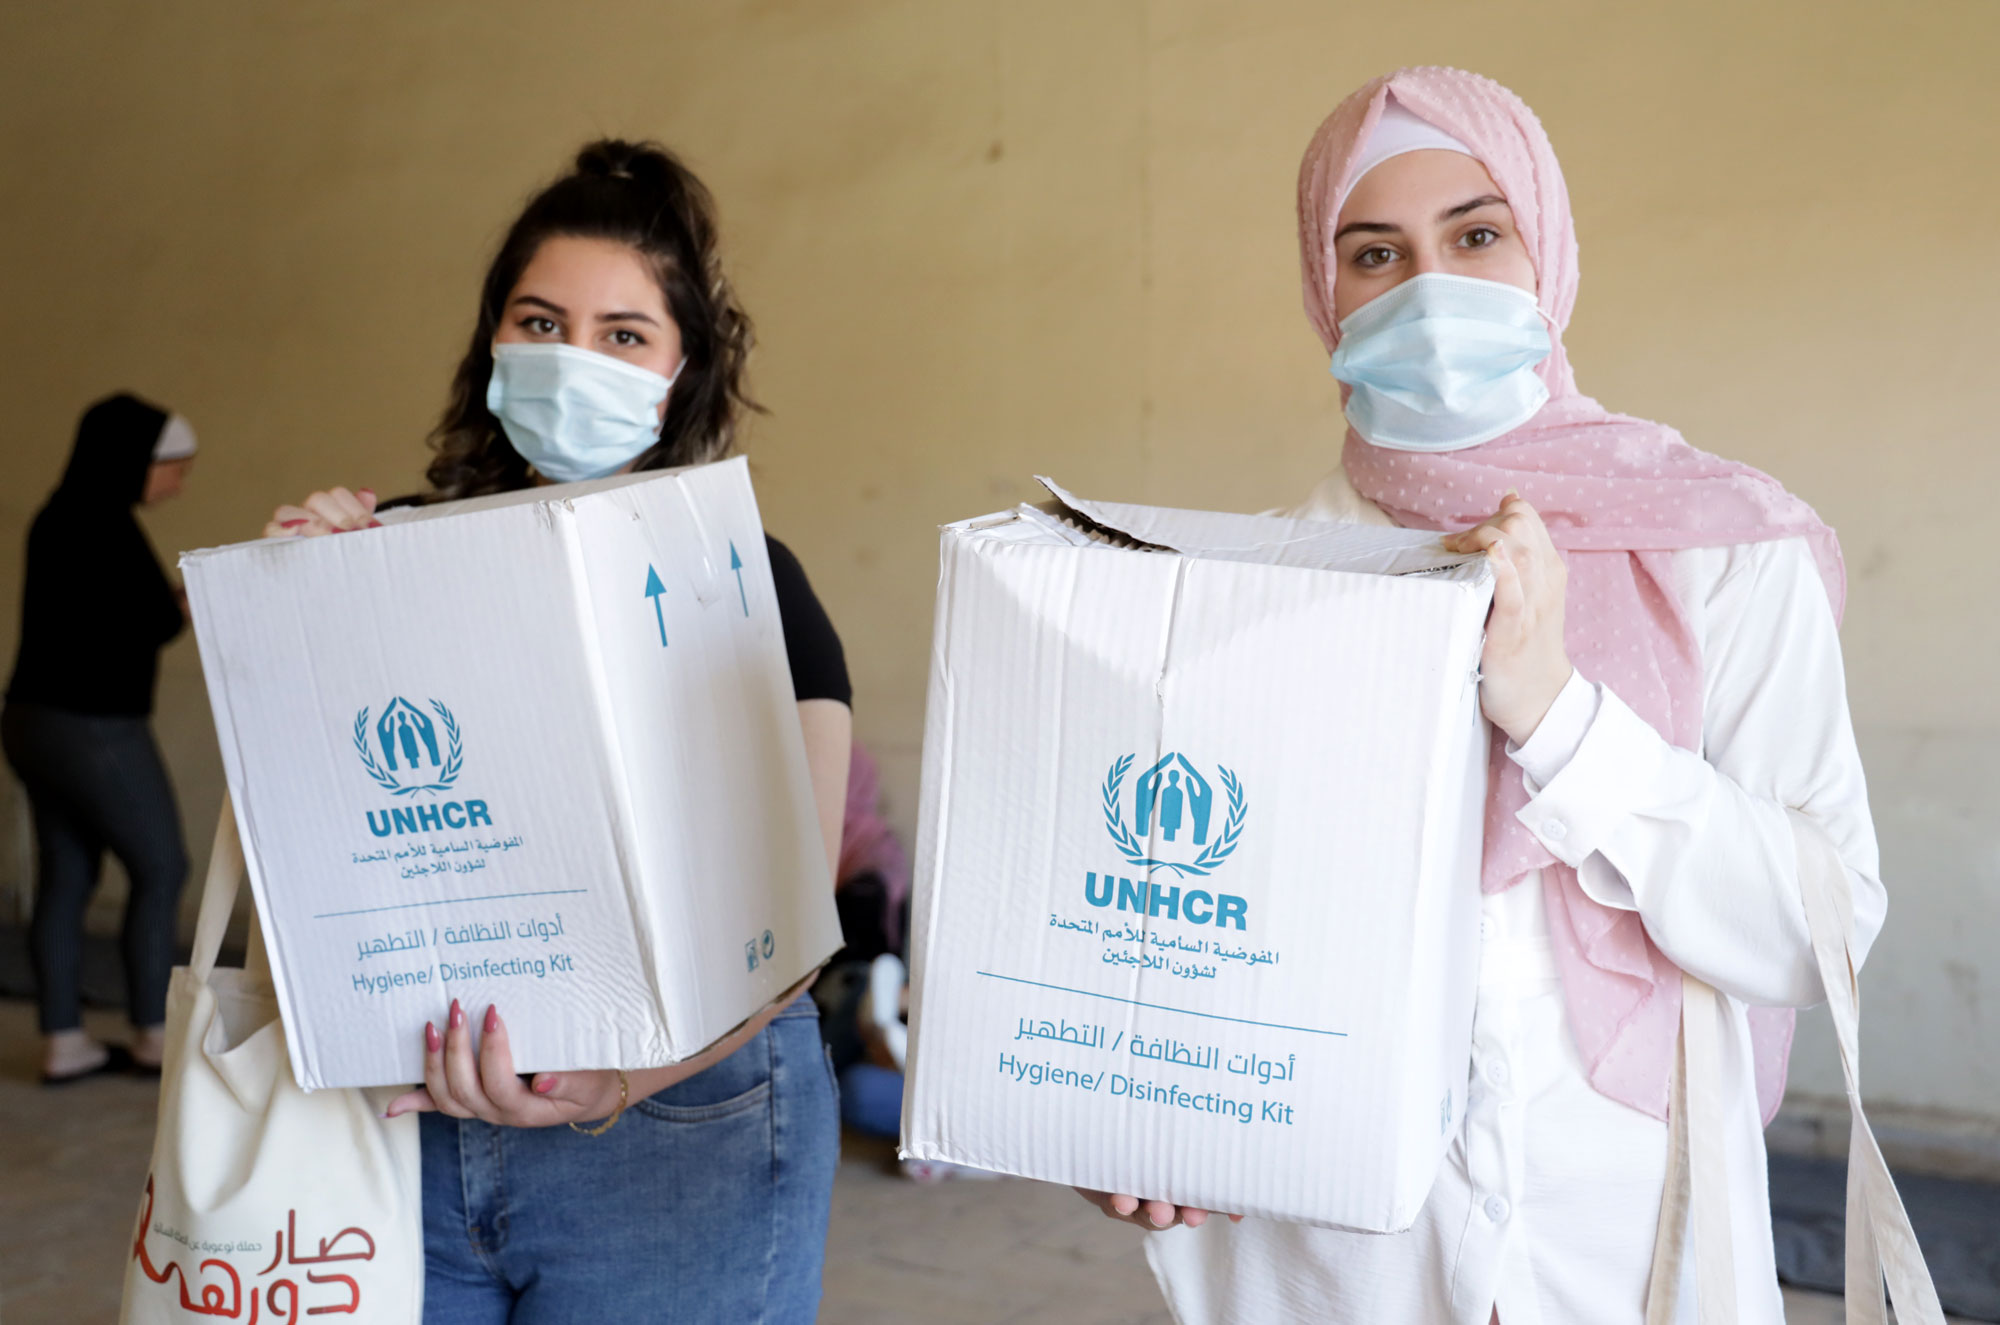 Ghofran (R), is a 21-year-old Lebanese woman lives in Baalbek. After attending an awareness session she said, "I learned a lot of new information, such as the harm caused by certain medications during the menstrual cycle, and also about misconceptions such as the [supposed] danger of exercising during menstruation. We are in a conservative society that does not encourage such discussions. Today, I am able to educate my younger sisters and relatives about the menstrual cycle. I feel more confident.”